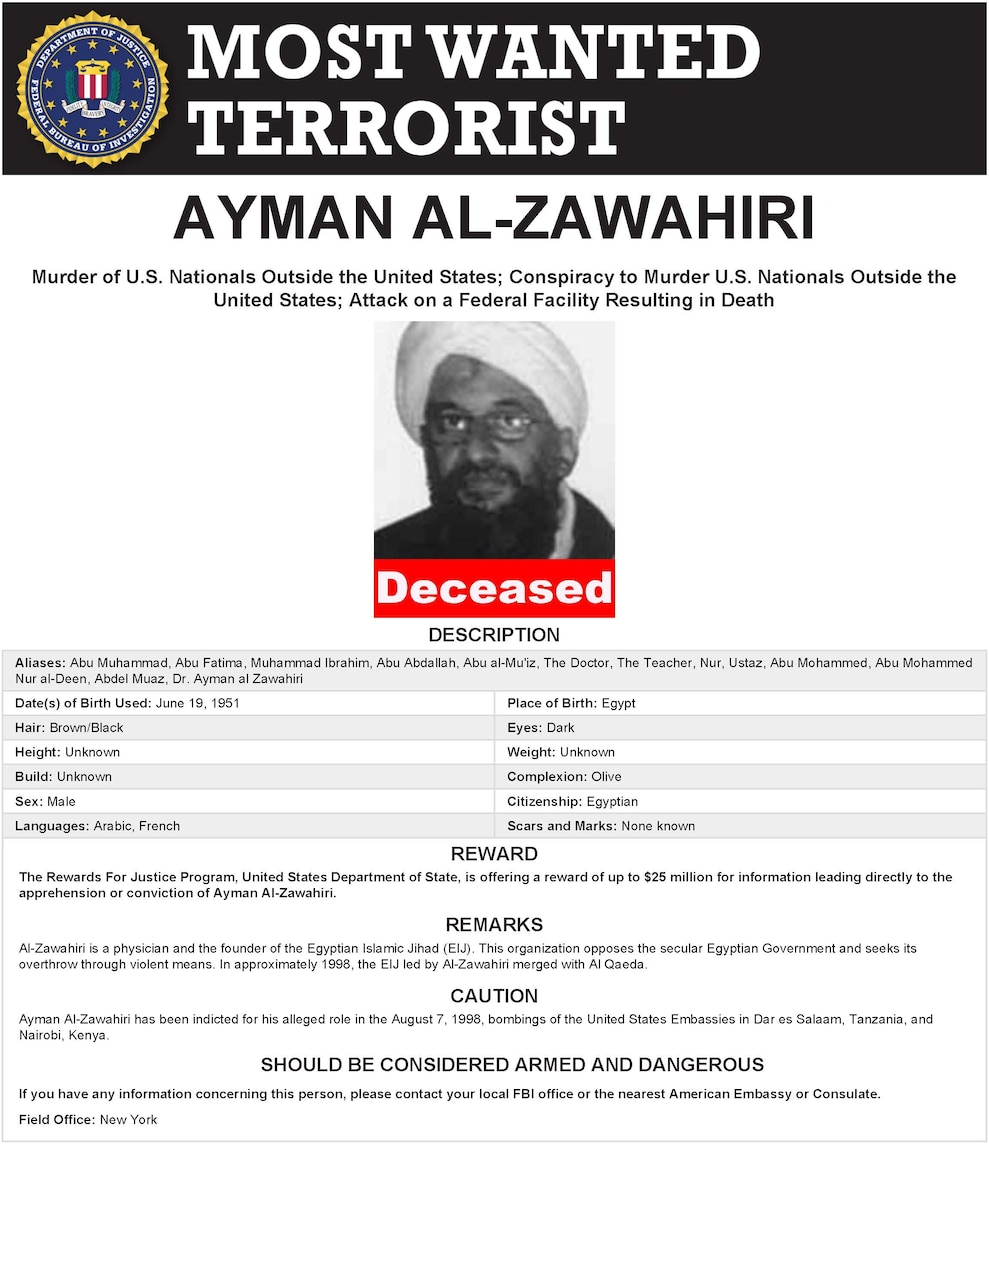 An FBI Most Wanted poster shows a man’s picture and the word “Deceased.”